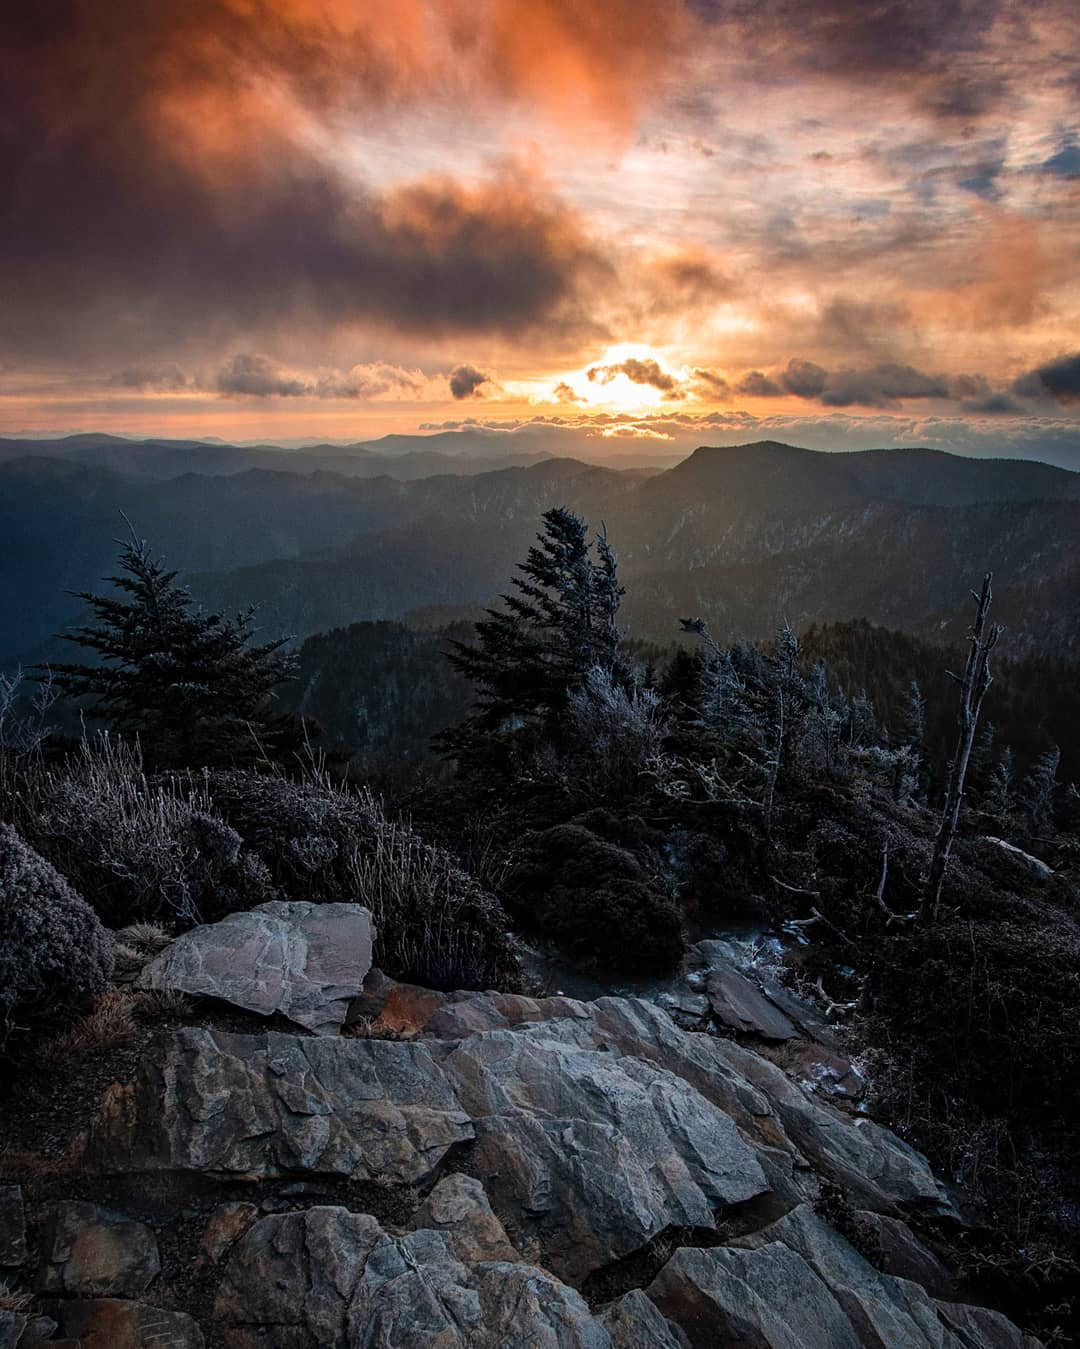 Top 7 National Parks in the USA - Great Smoky Mountains National Park